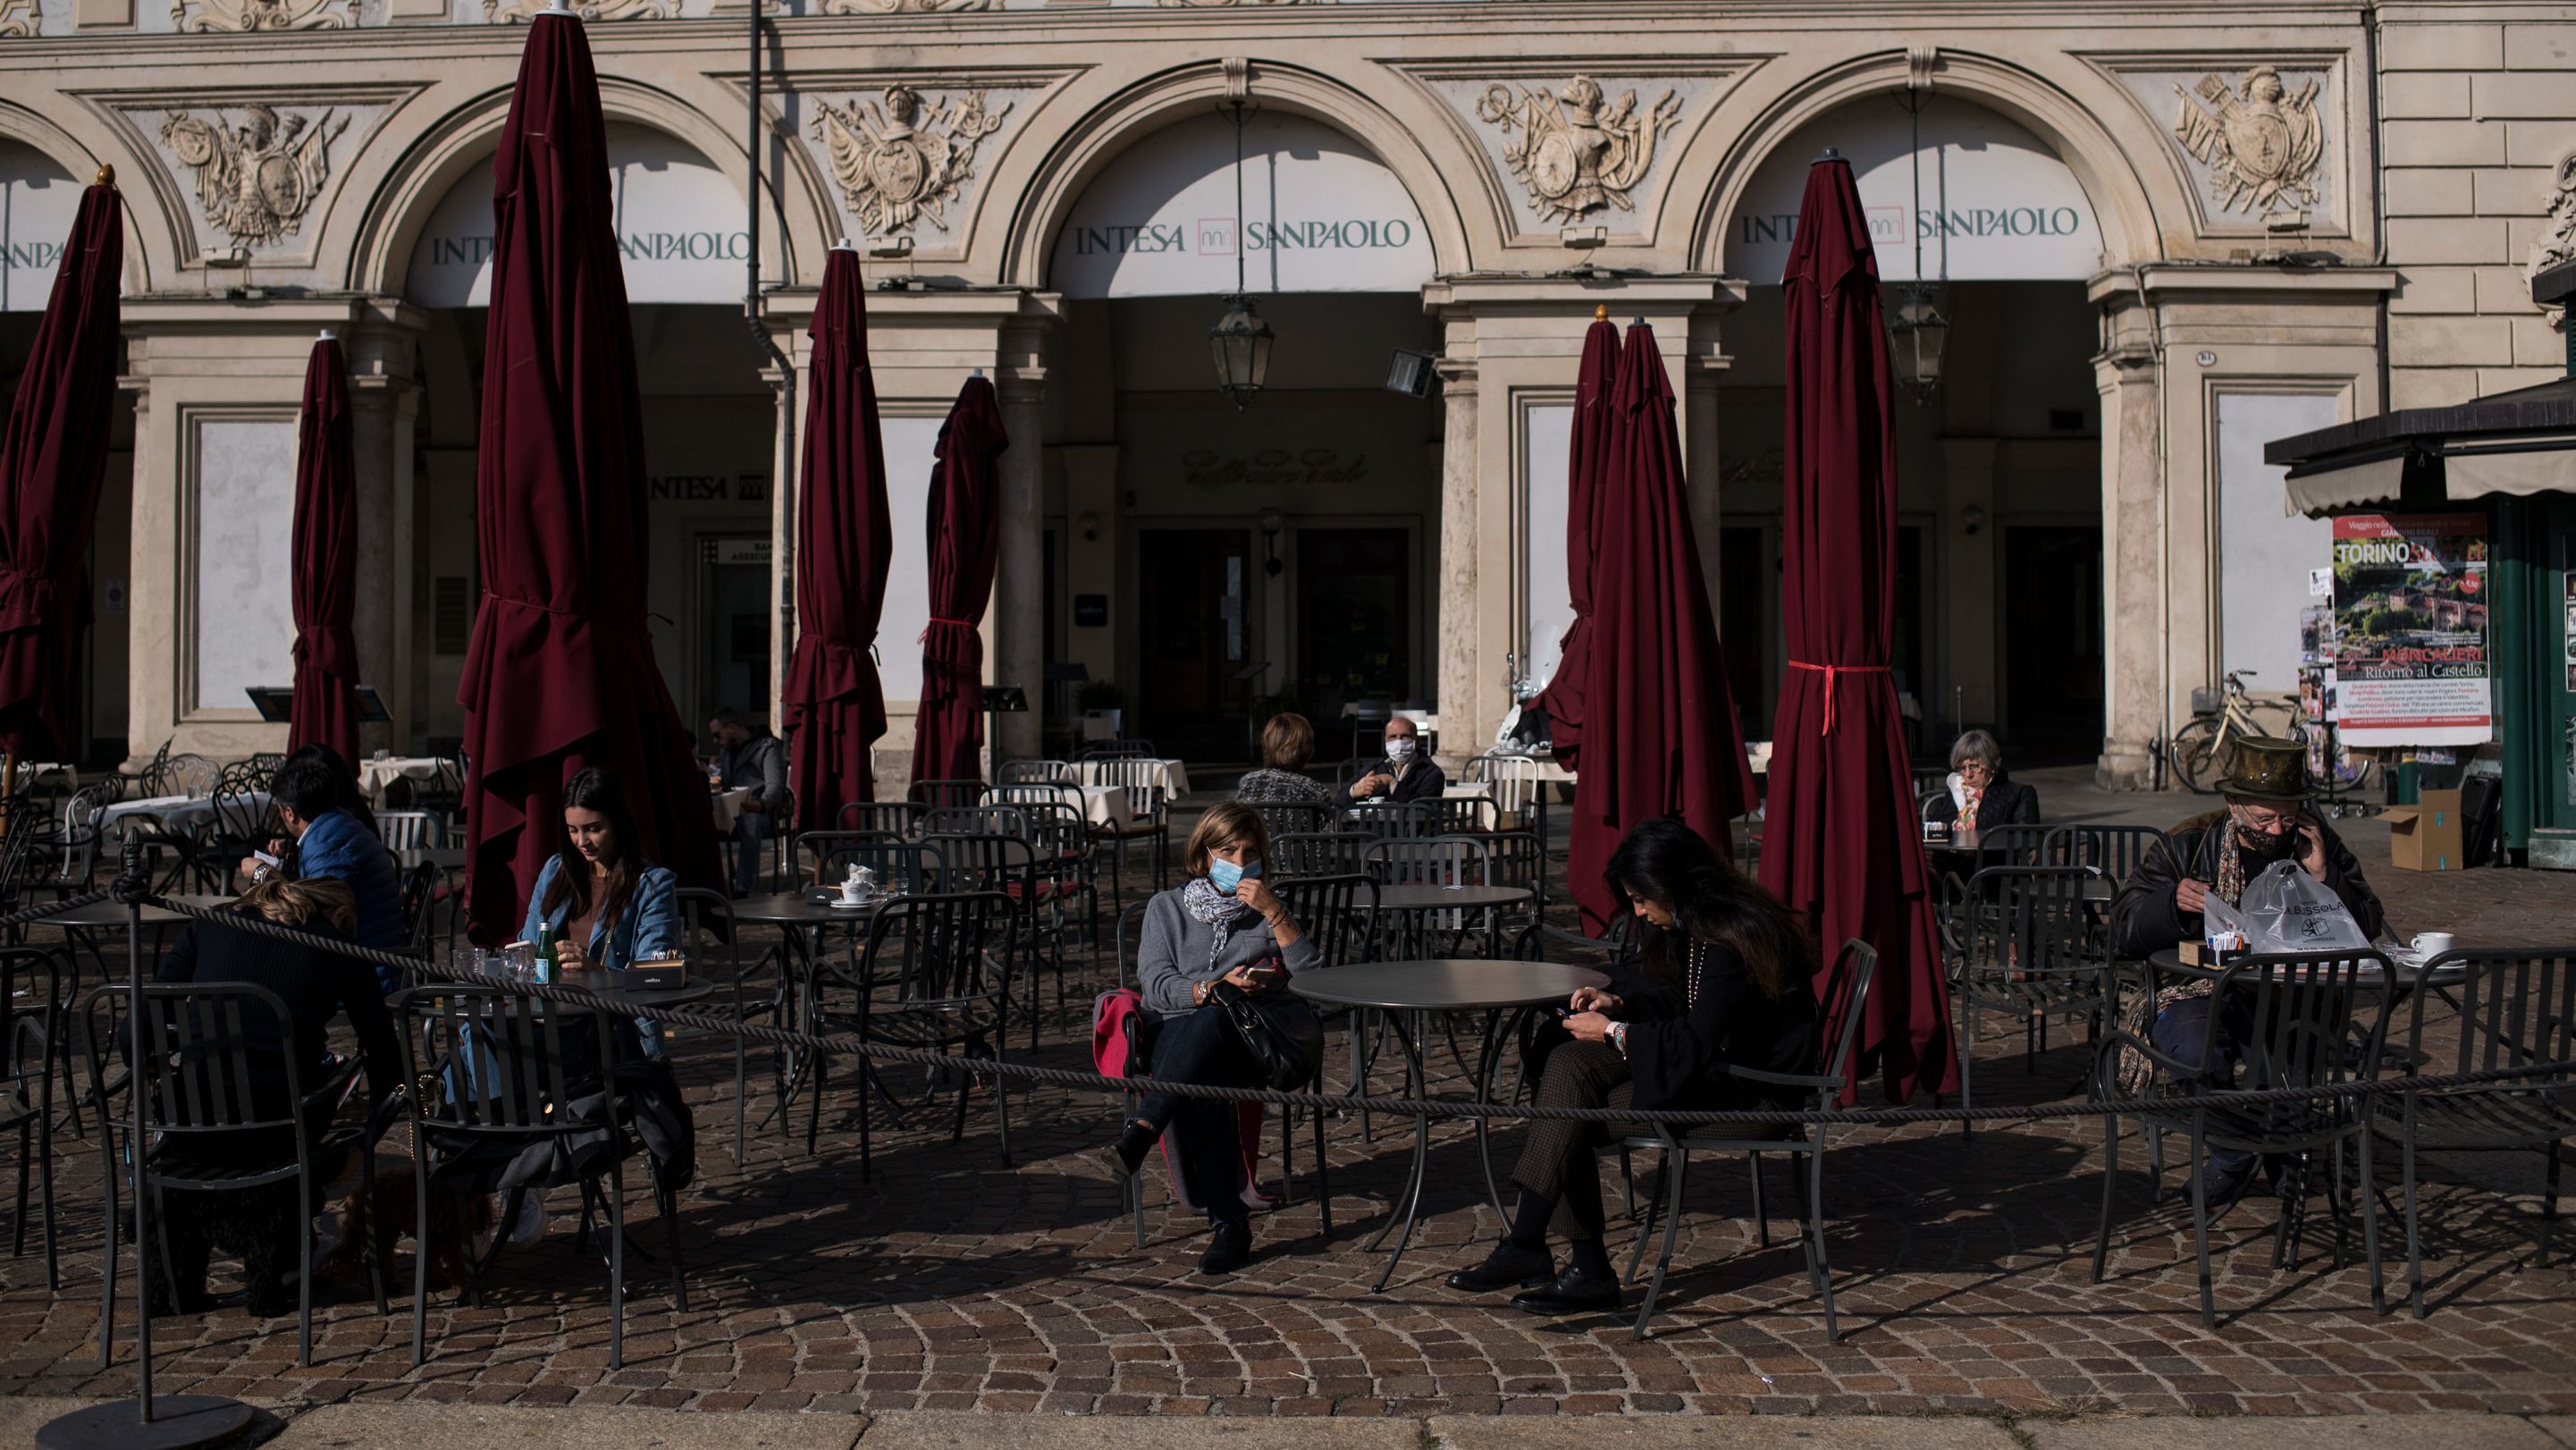 People wearing masks at Piazza San Carlo in Turin on Thursday, the last day before new lockdown measures for the Italian region of Piedmont.